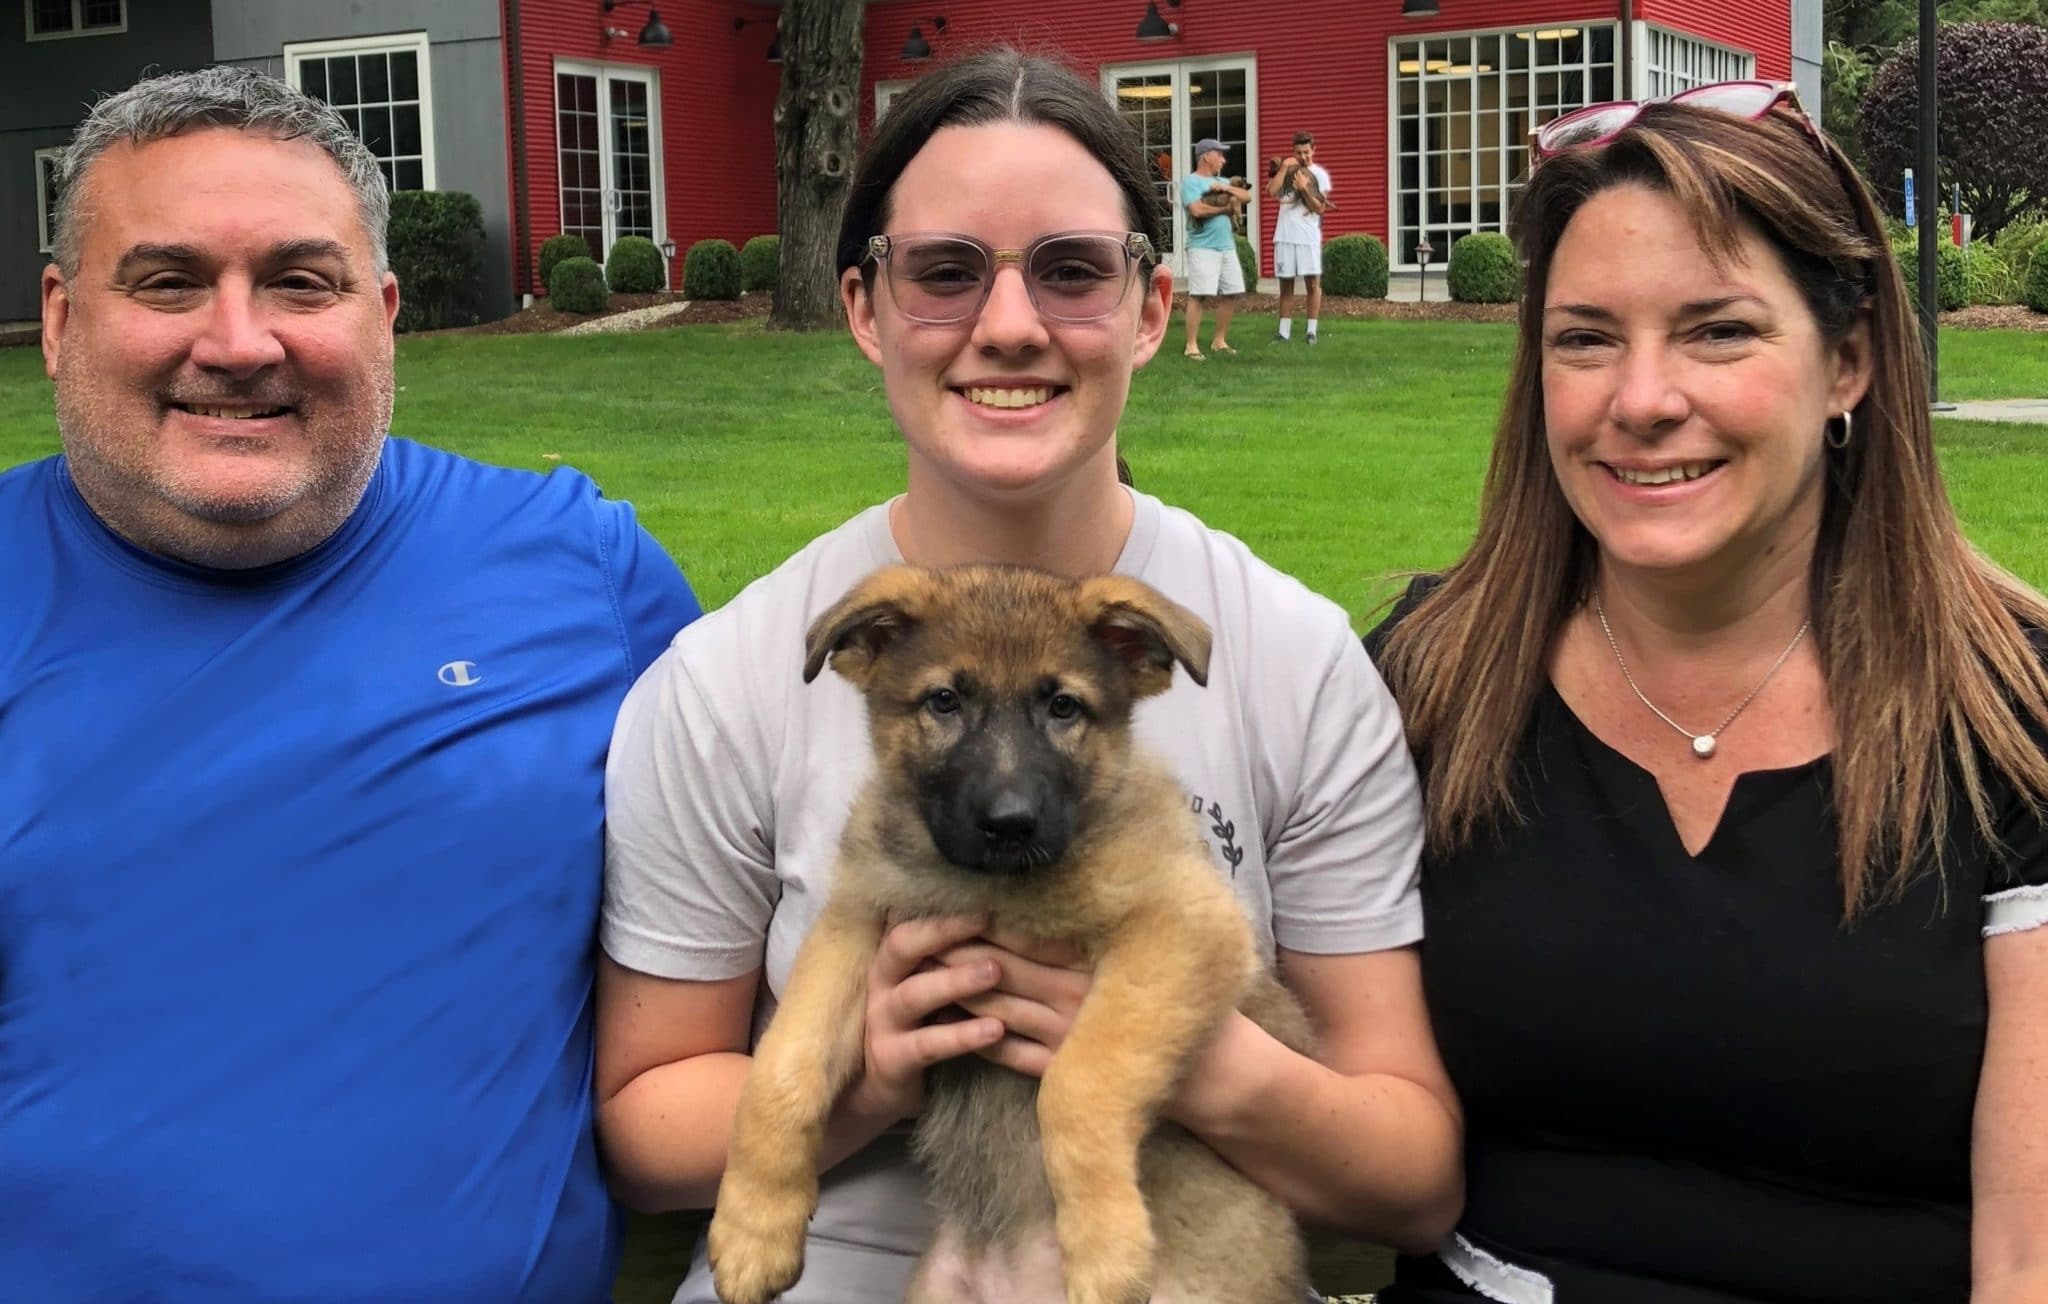 The Chapman's, a volunteer puppy raiser family, with Fidelco pup, "Lincoln".